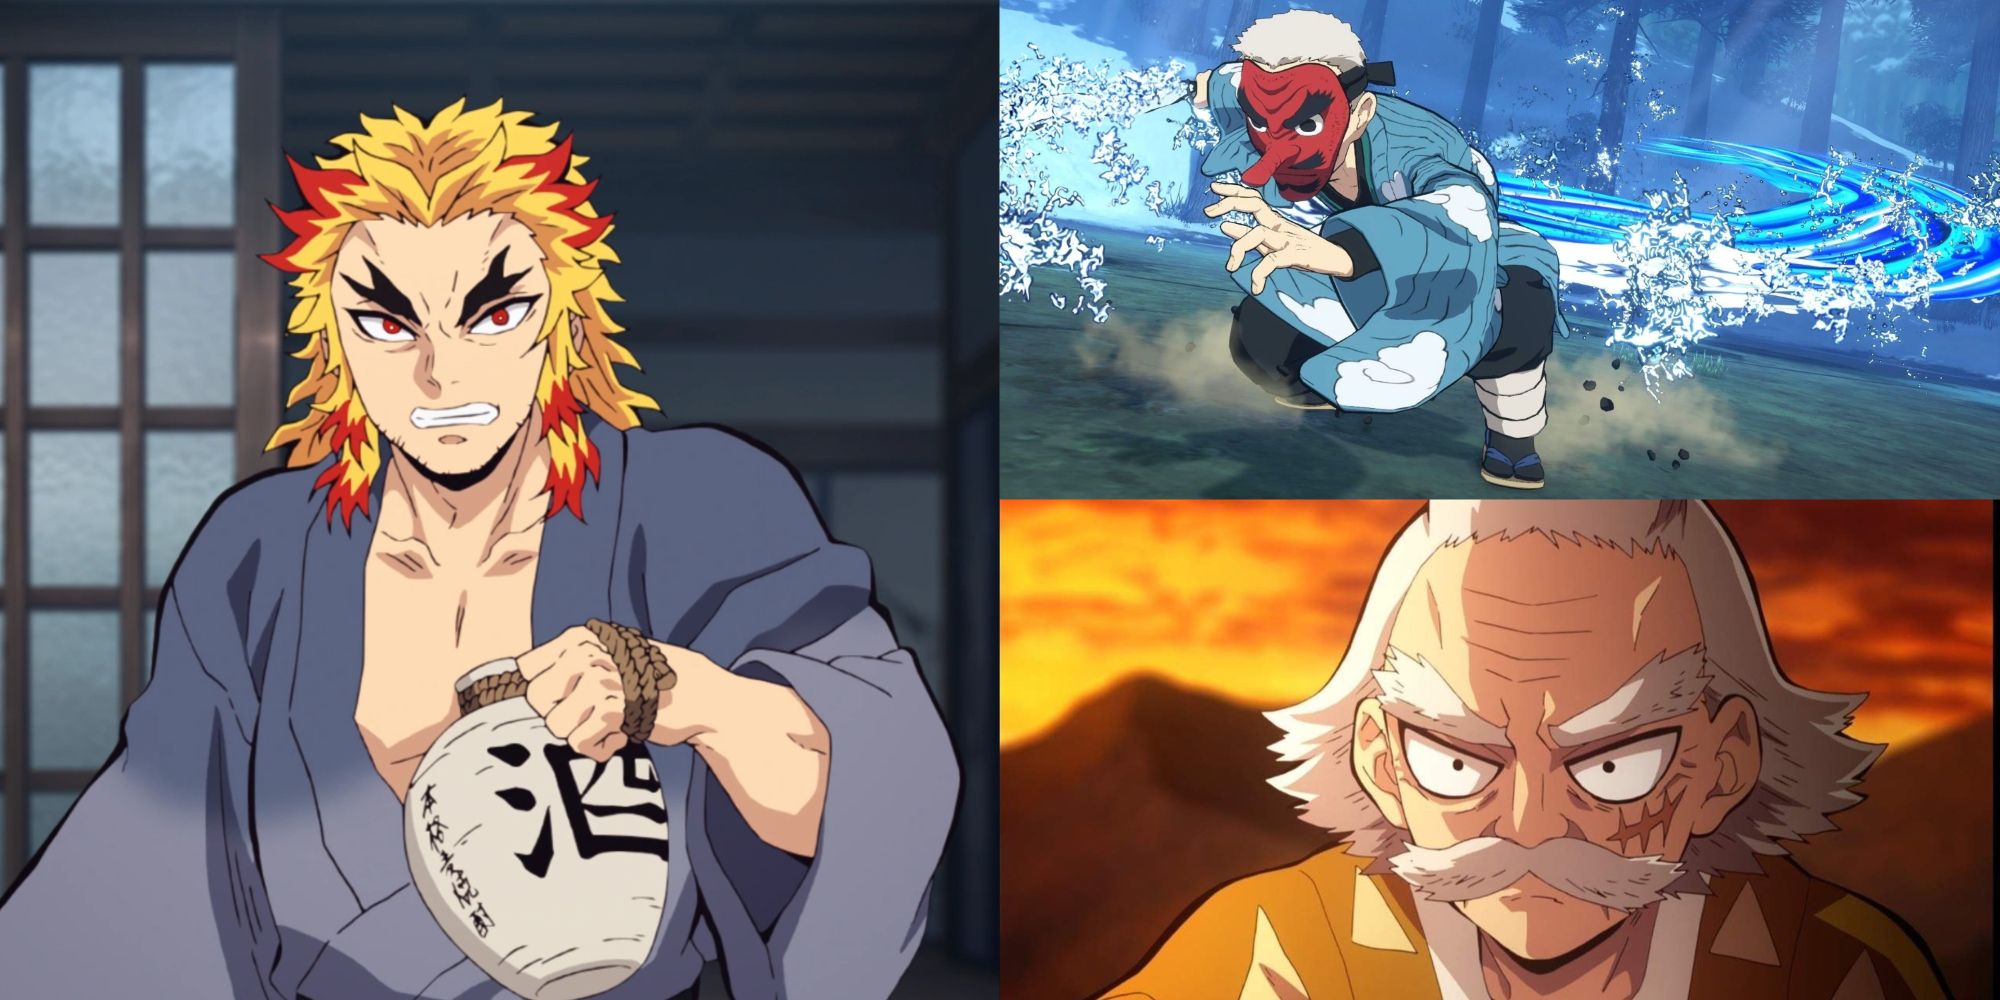 Who would win between these 4 former hashira?